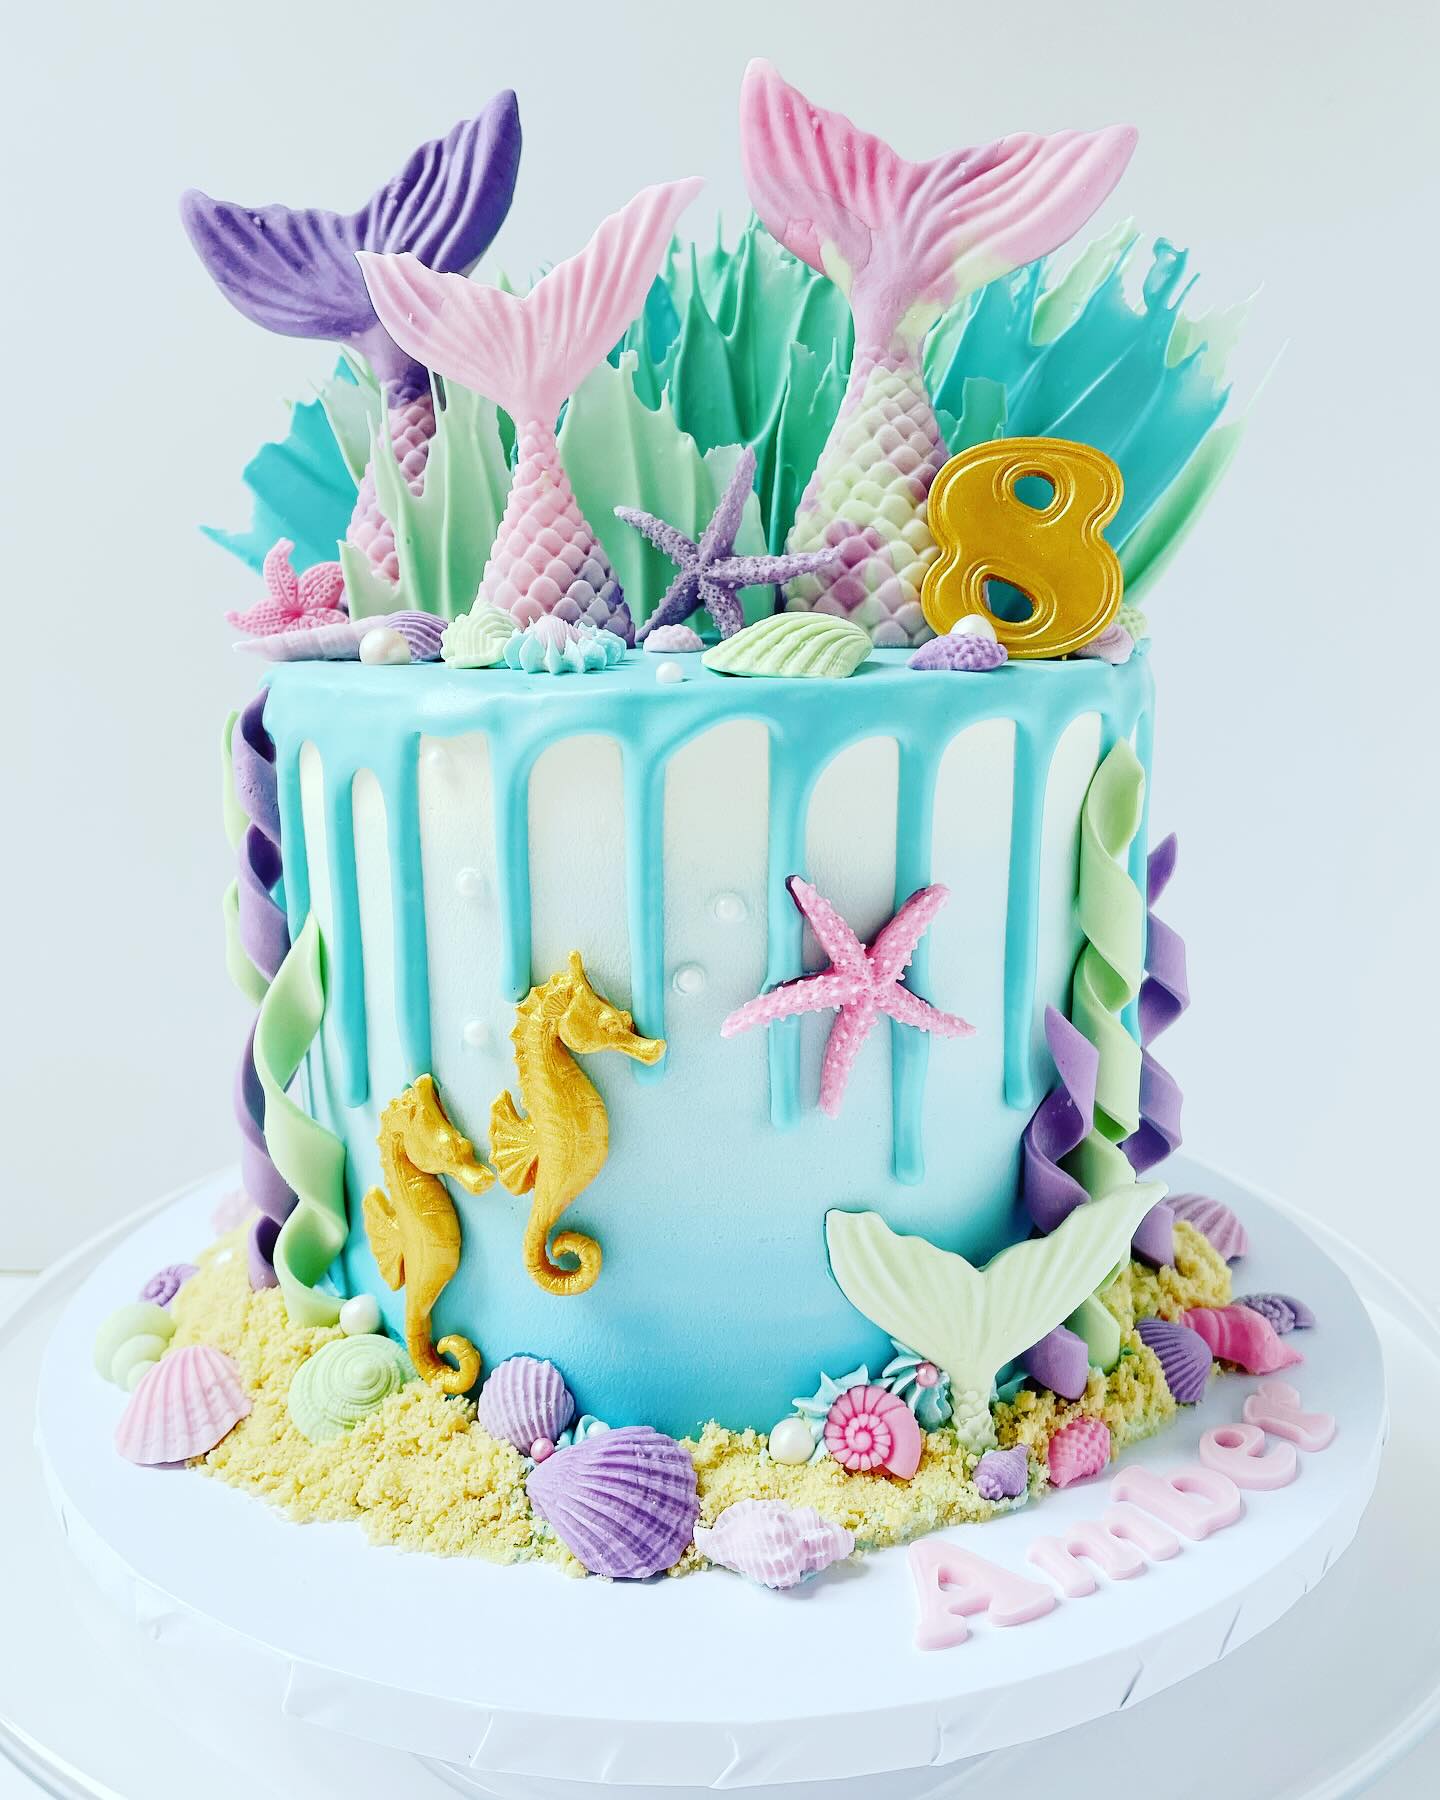 🧜🏻‍♀️🐚🎂 Discover enchanting cake ideas that will turn your party into an unforgettable, ocean-inspired celebration.